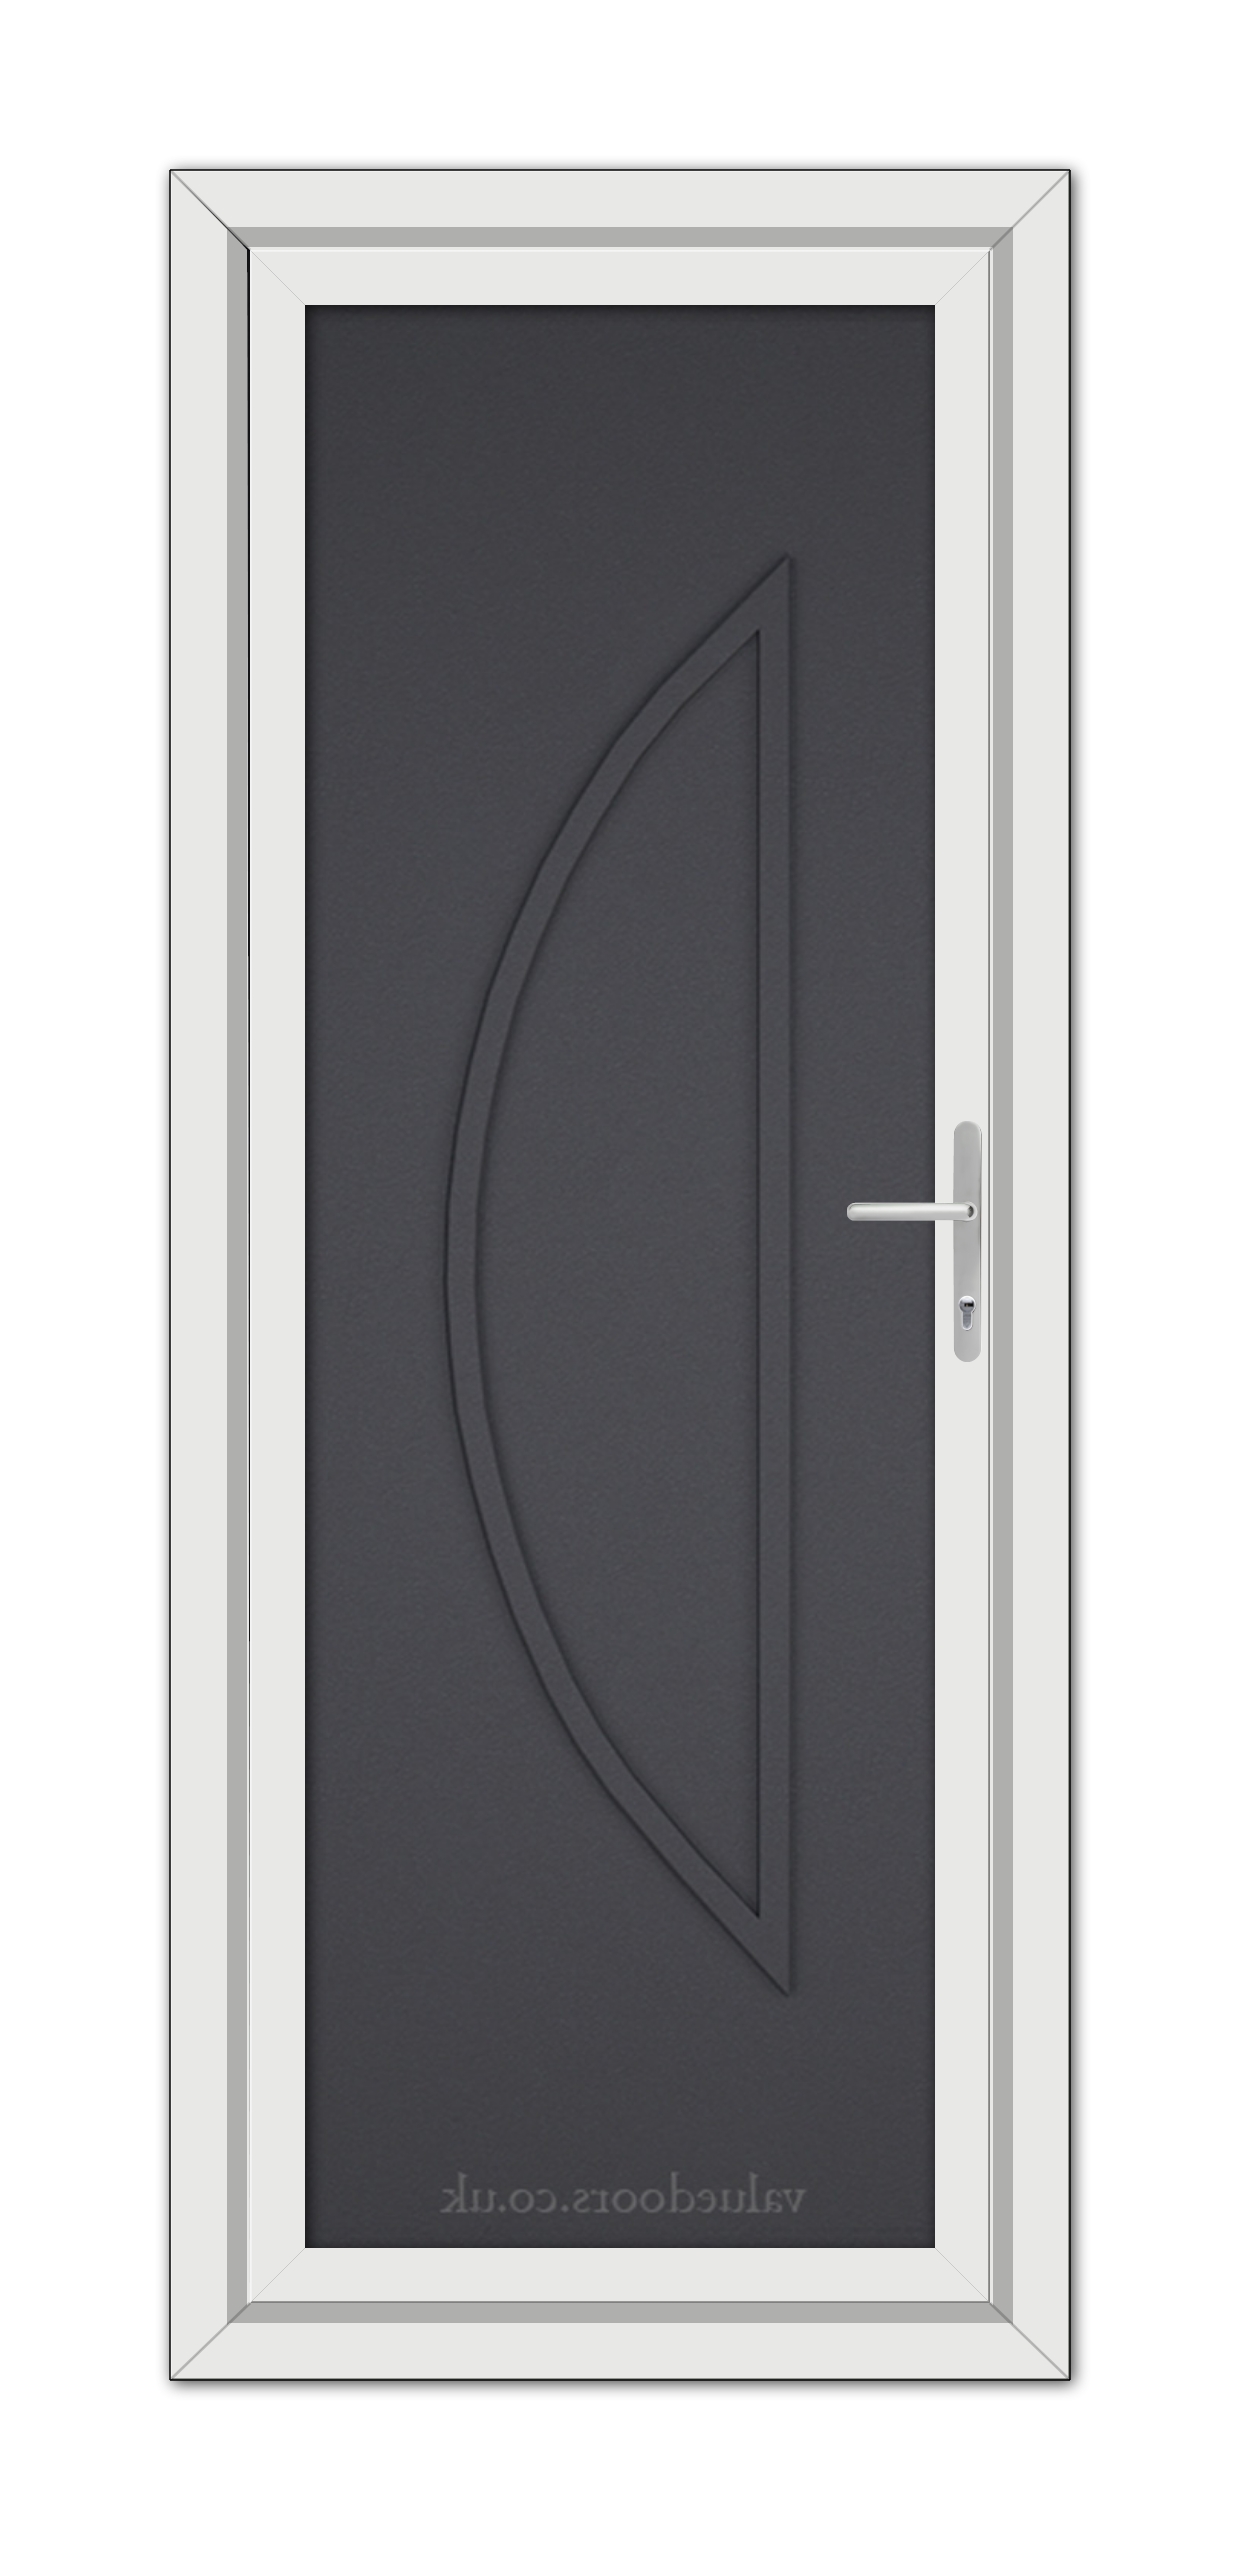 A modern, vertical image of a Grey Grained Modern 5051 Solid uPVC Door with a sleek design featuring an elongated, embossed oval shape and a metallic handle on the right side.